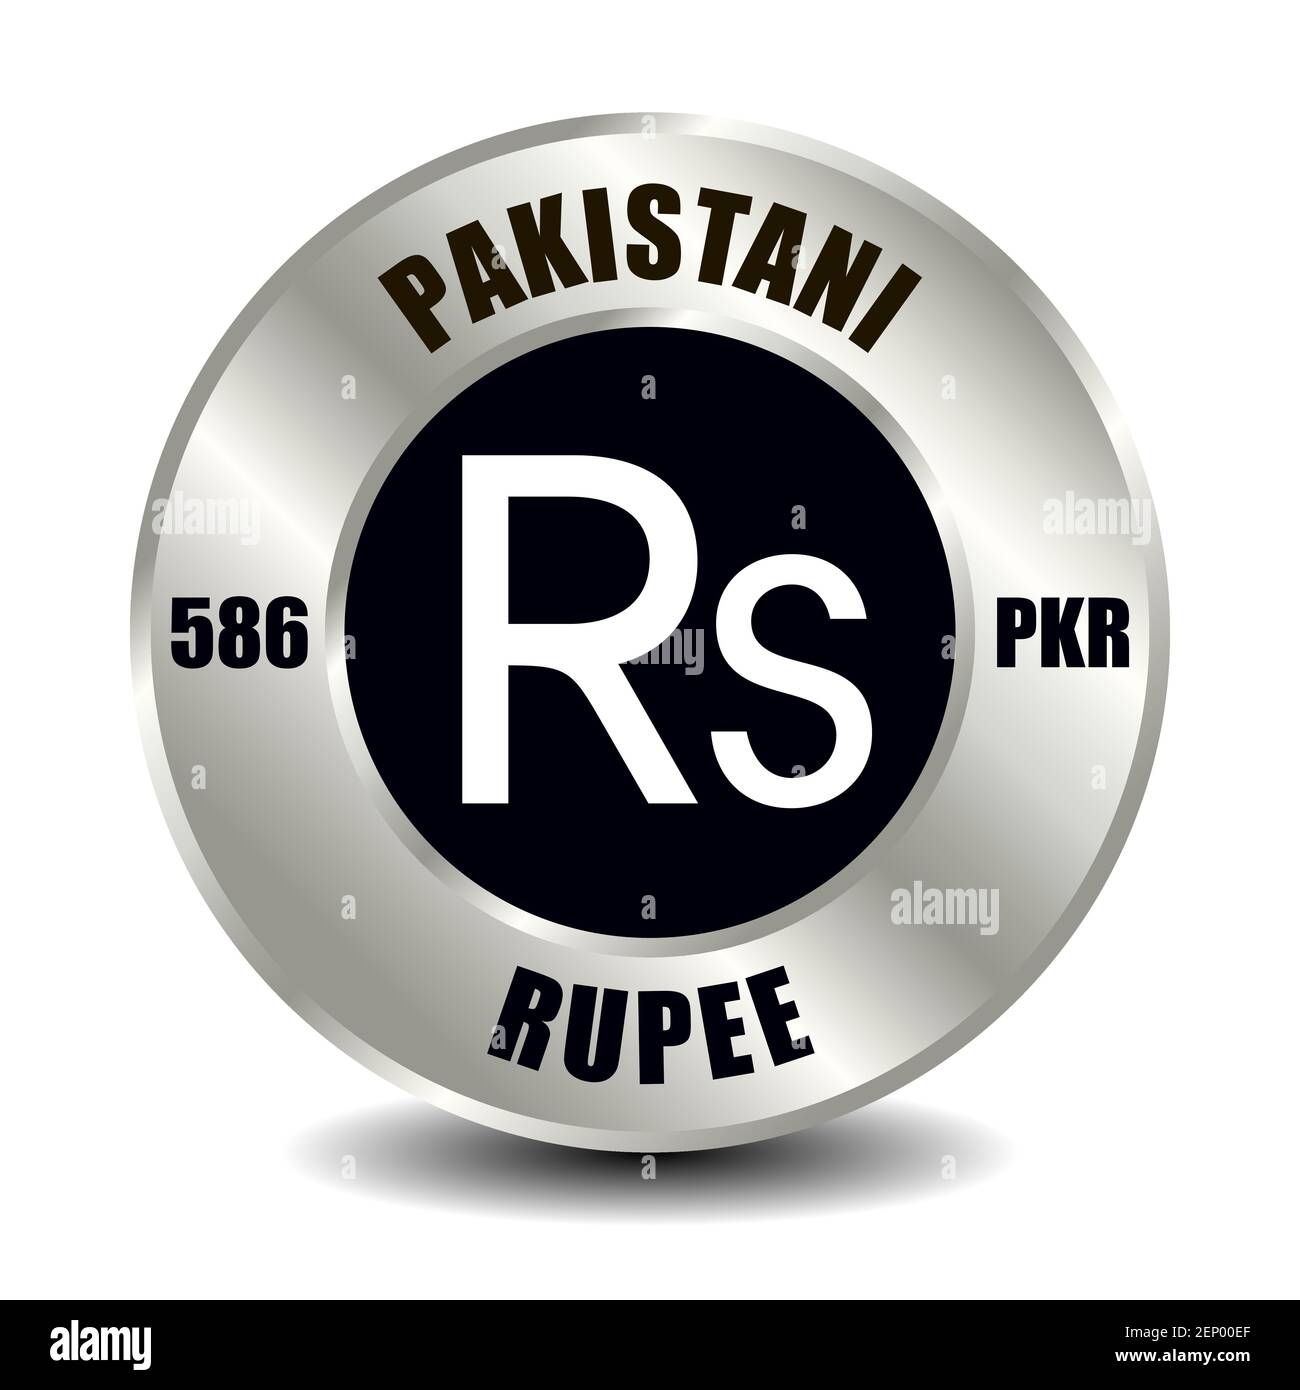 Pakistan money icon isolated on round silver coin. Vector sign of currency symbol with international ISO code and abbreviation Stock Vector